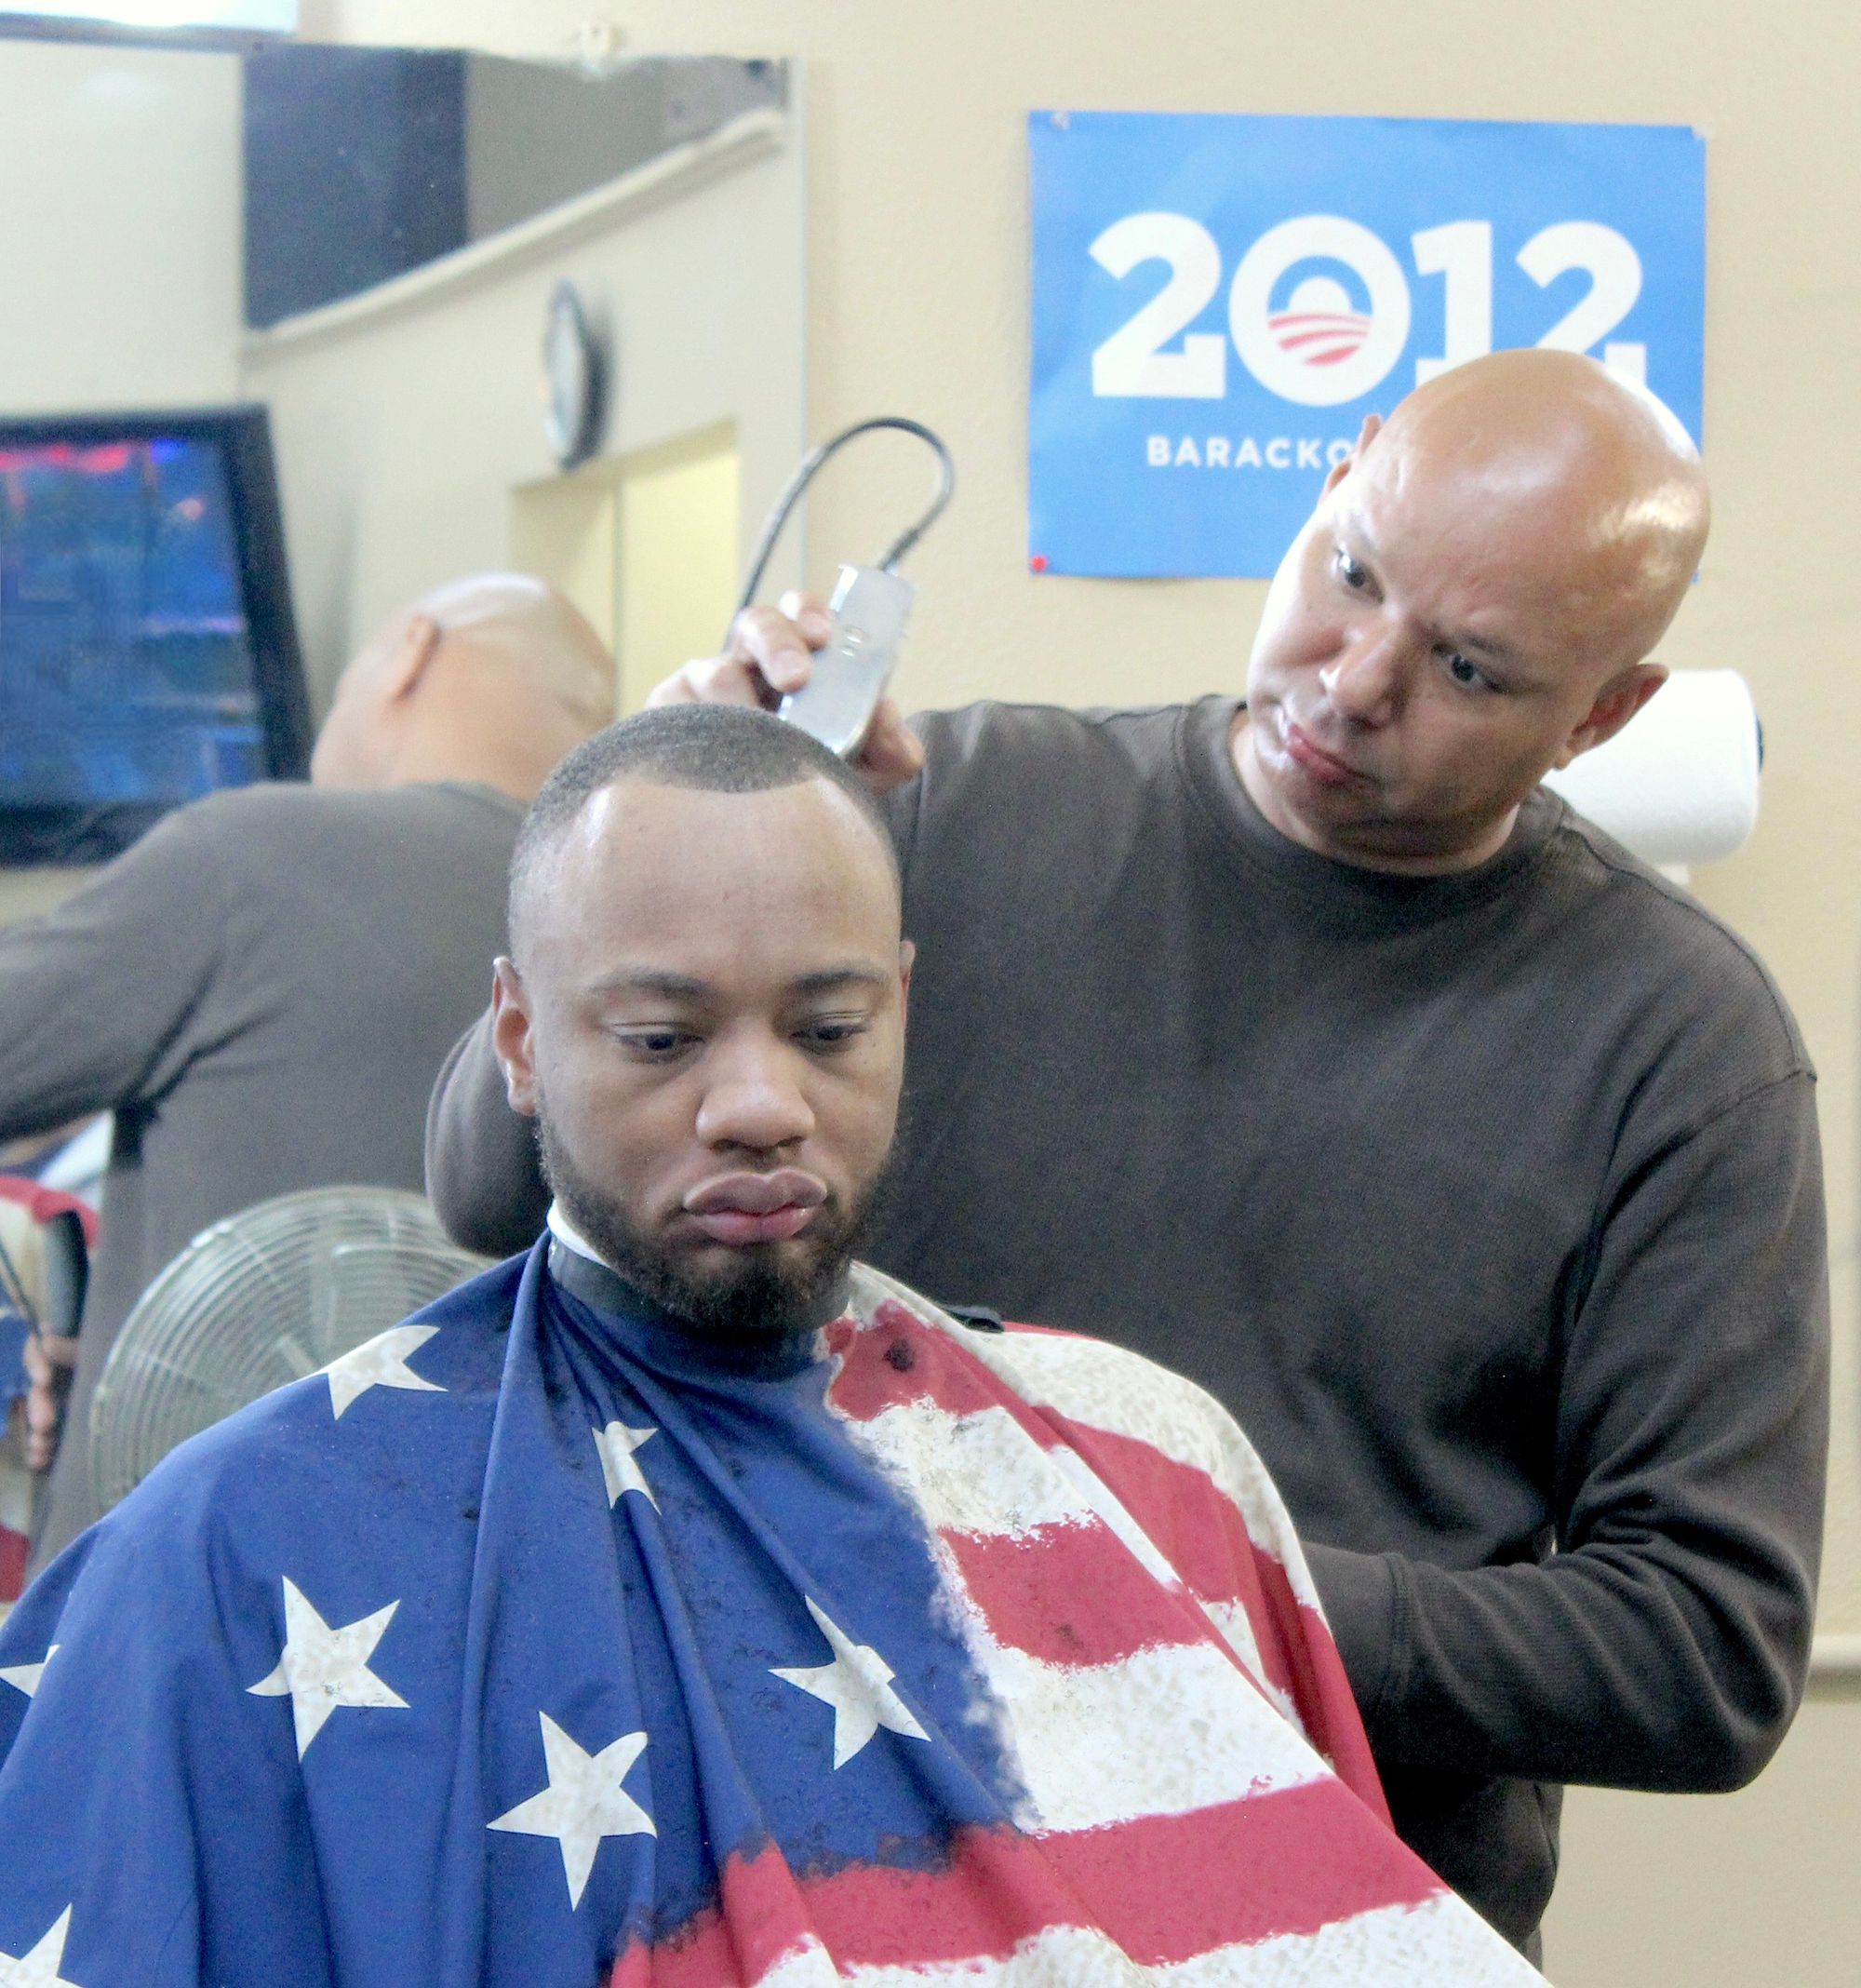 Photo of a barber trimming a man's hair. The barber is bald and the customer is wearing a drape with an image of the American flag on it. In the background, their reflection is visible in the mirror as is a small blue, white and red poster for Barack Obama's campaign in 2012.